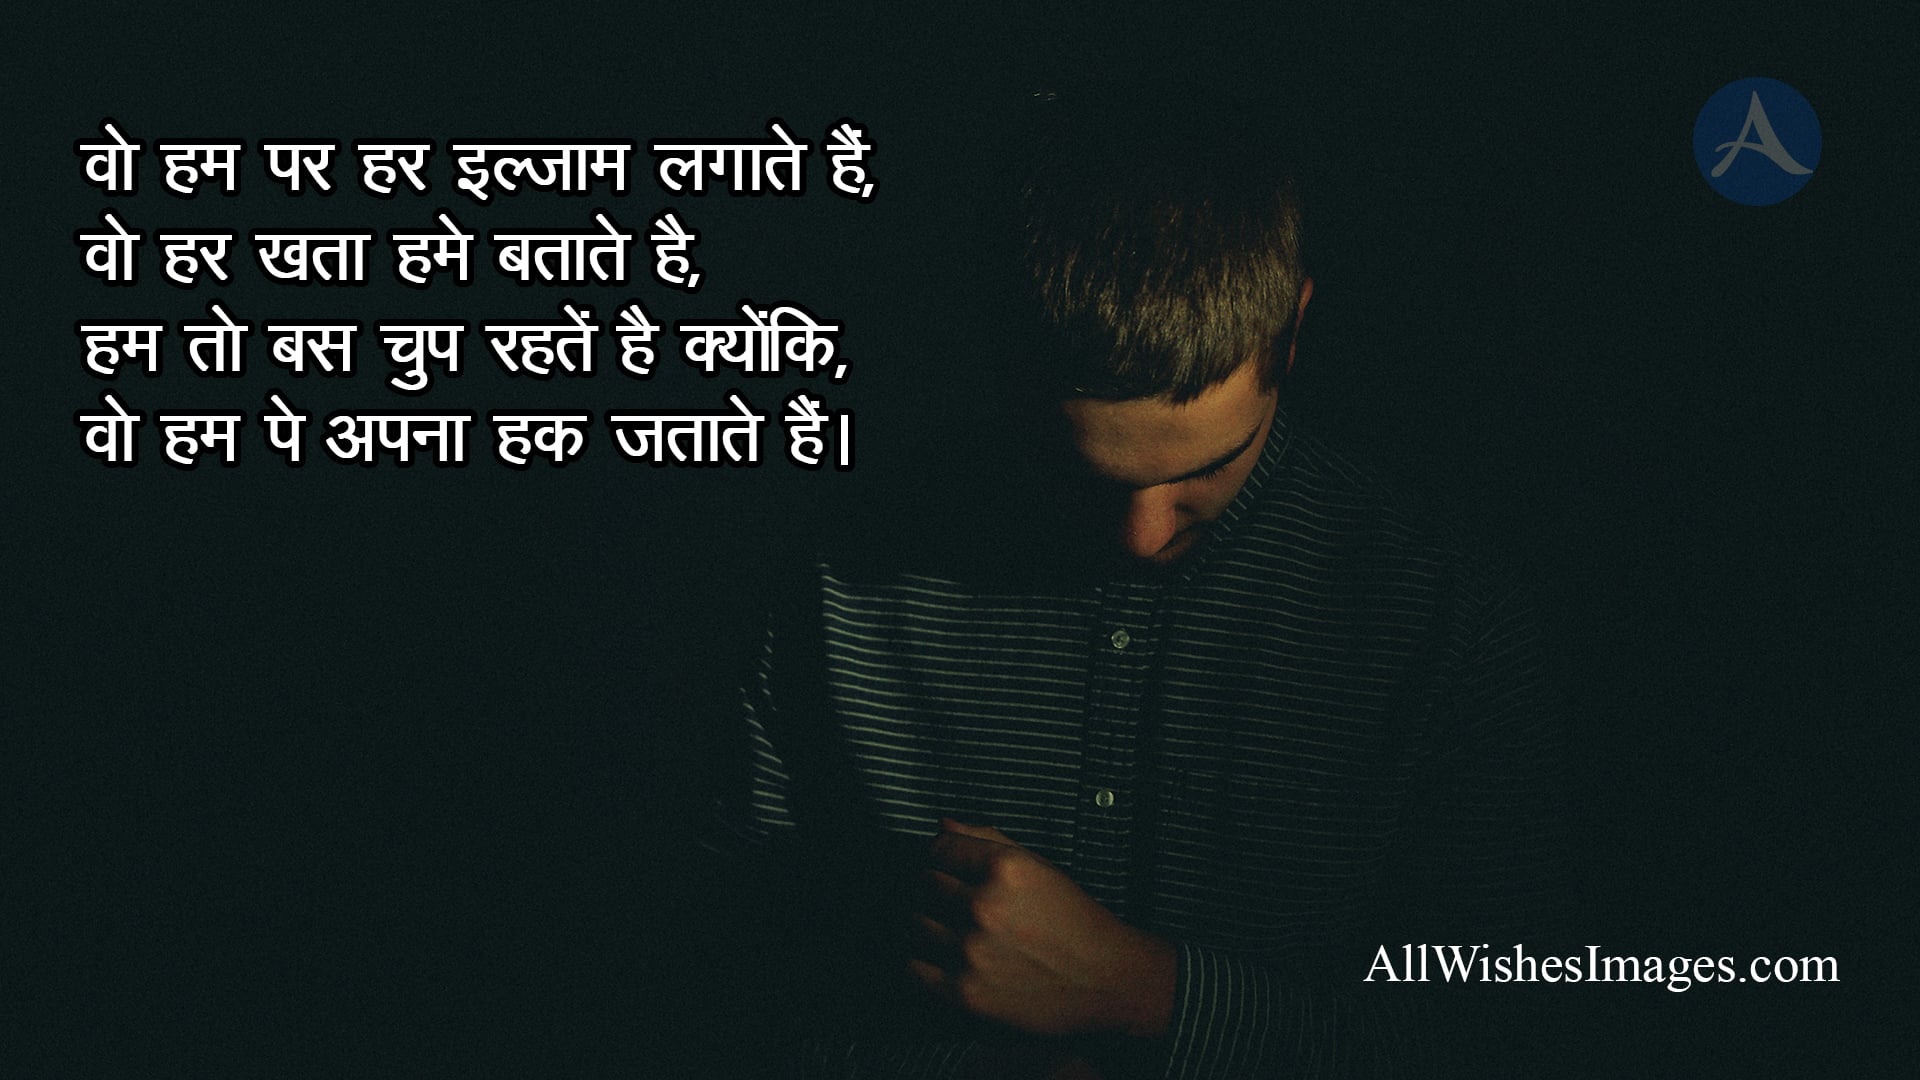 Sad Love Shayri - All Wishes Images - Images for WhatsApp